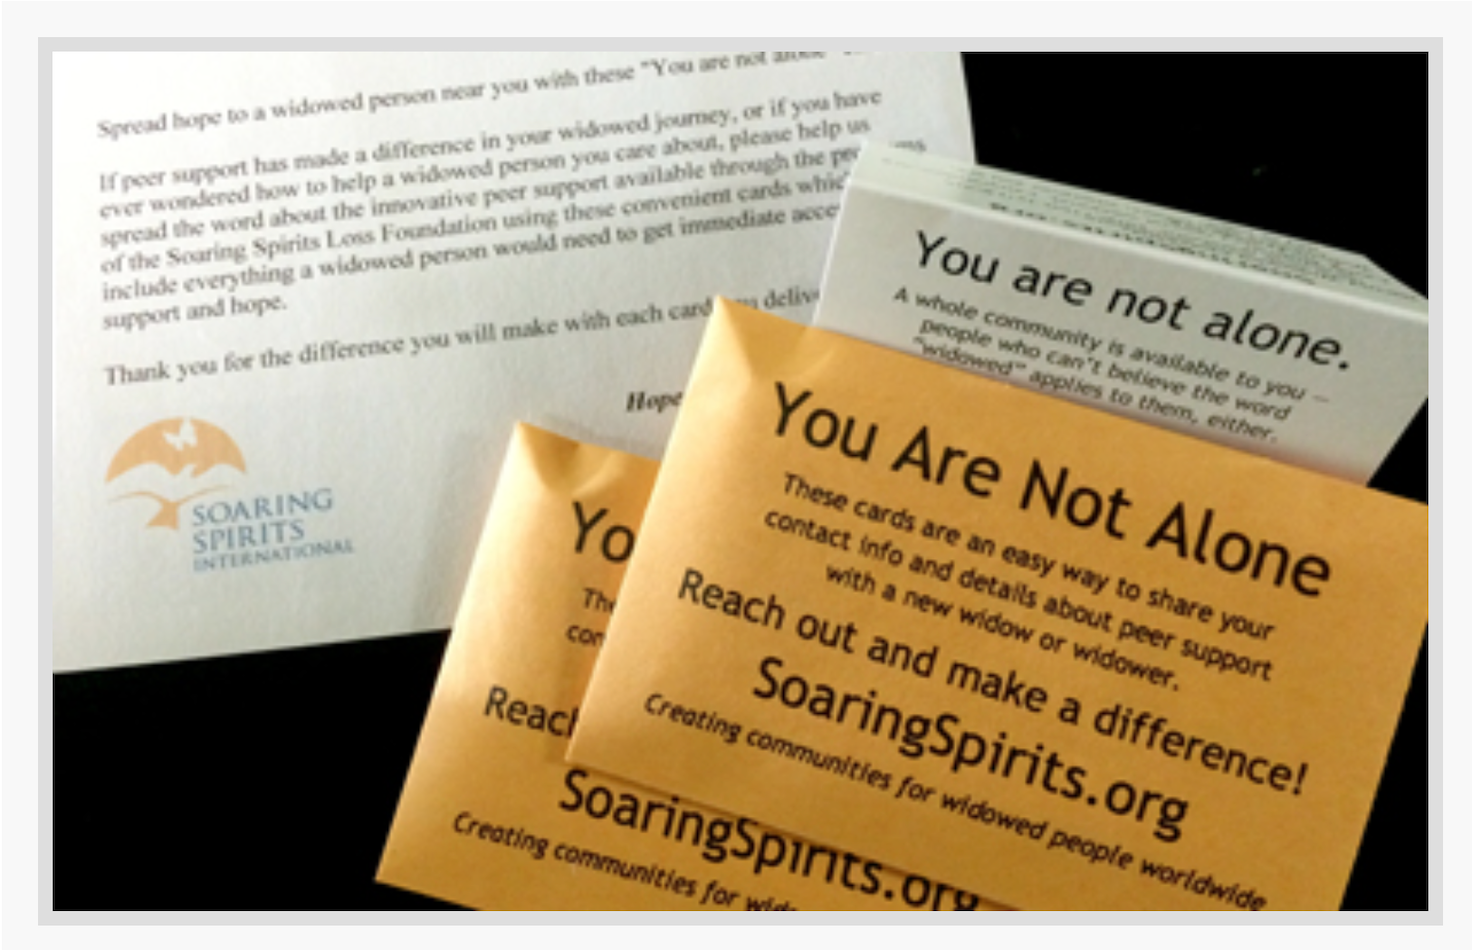 small envelopes that include information about Soaring Spirits International - You Are Not Alone